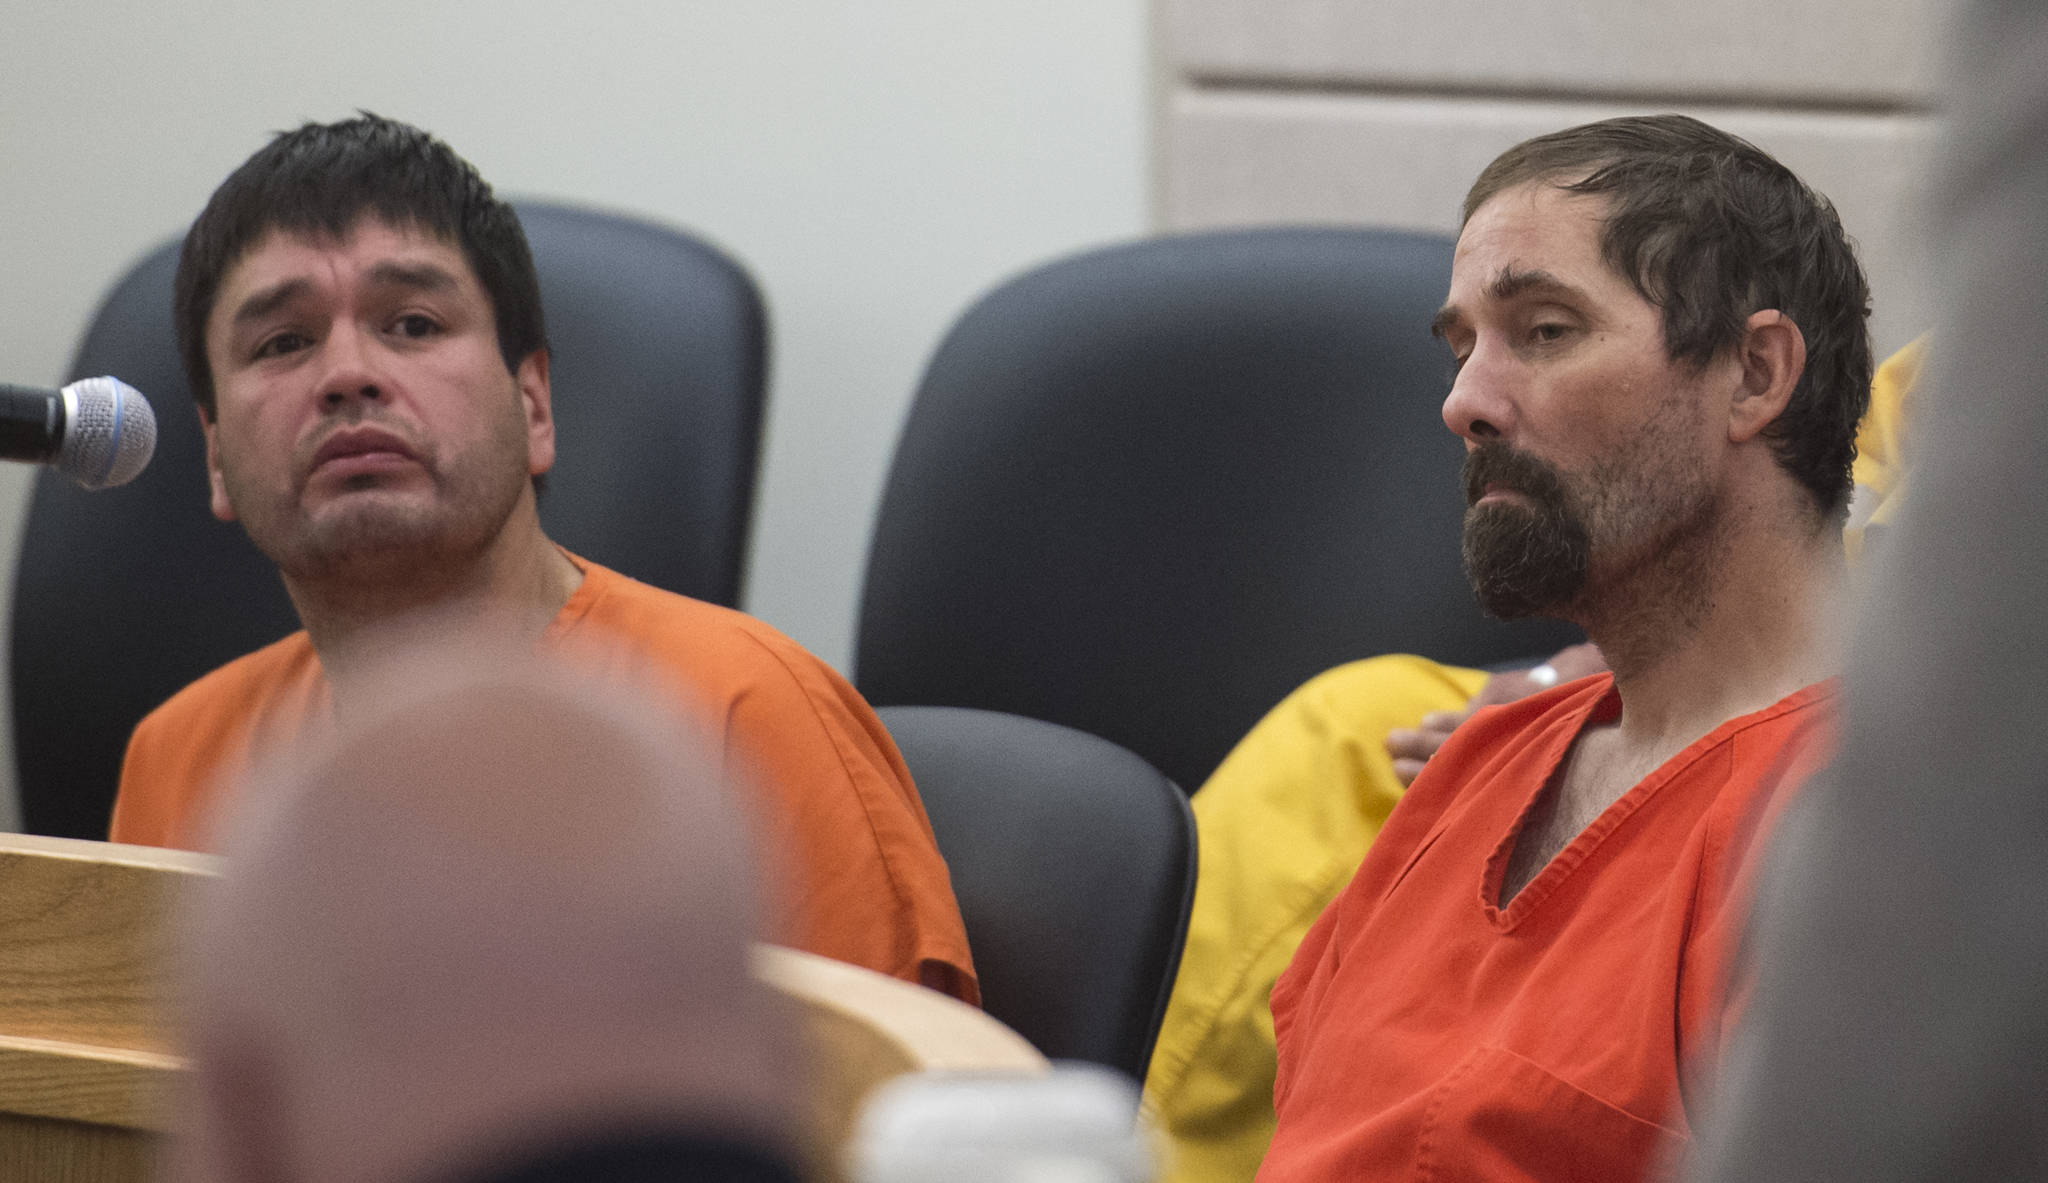 Joseph Corry Tong, left, and Derek Hunter Goodman appear in Juneau District Court for arraignment on burglary charges on Wednesday, May 24, 2017. (Michael Penn | Juneau Empire)